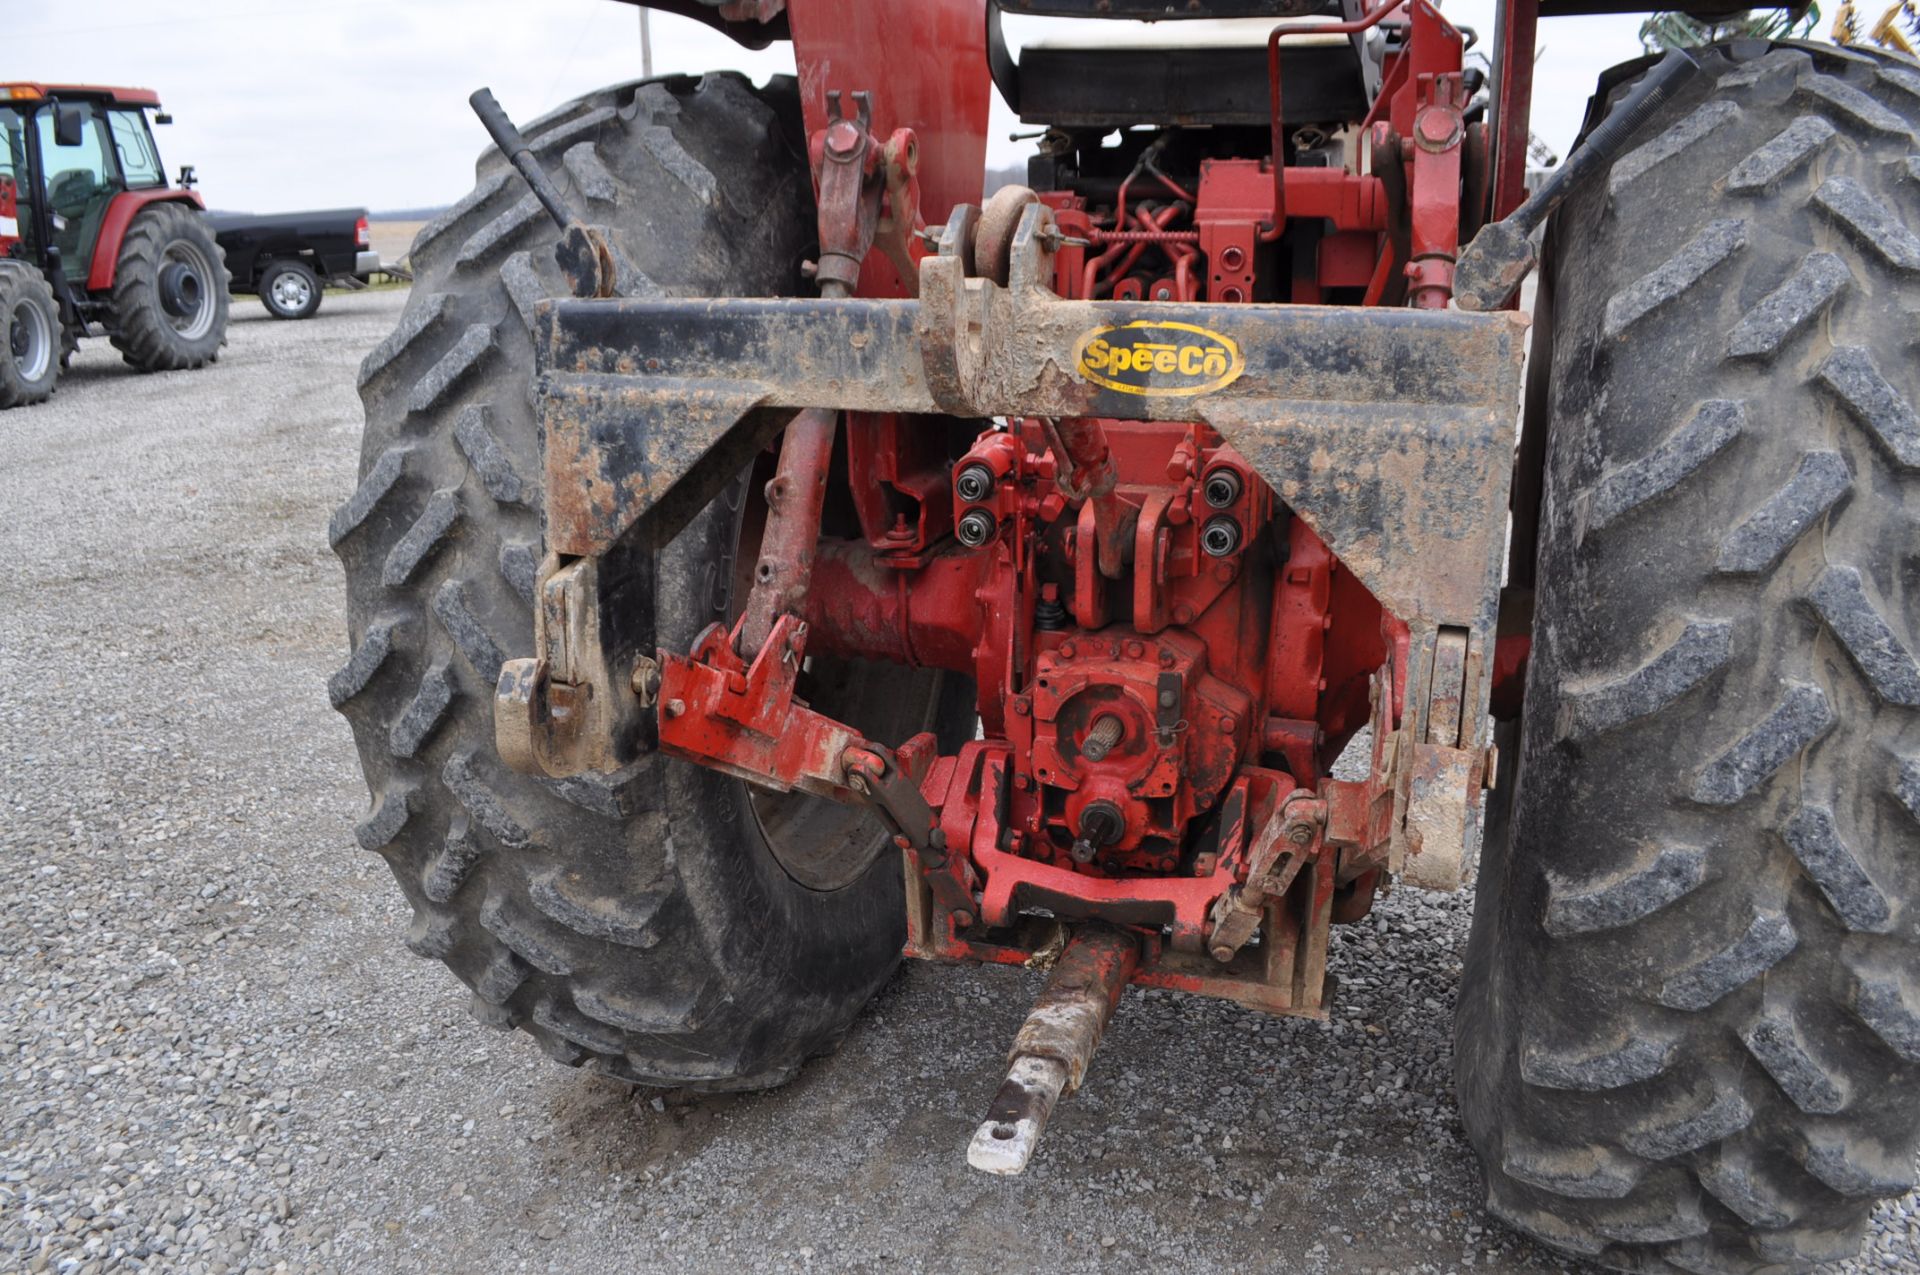 International 1066 tractor, 18.4 R 38 rear, 11L-15 front, 2 hyd remotes, 3 pt, quick hitch, 540/1000 - Image 10 of 18